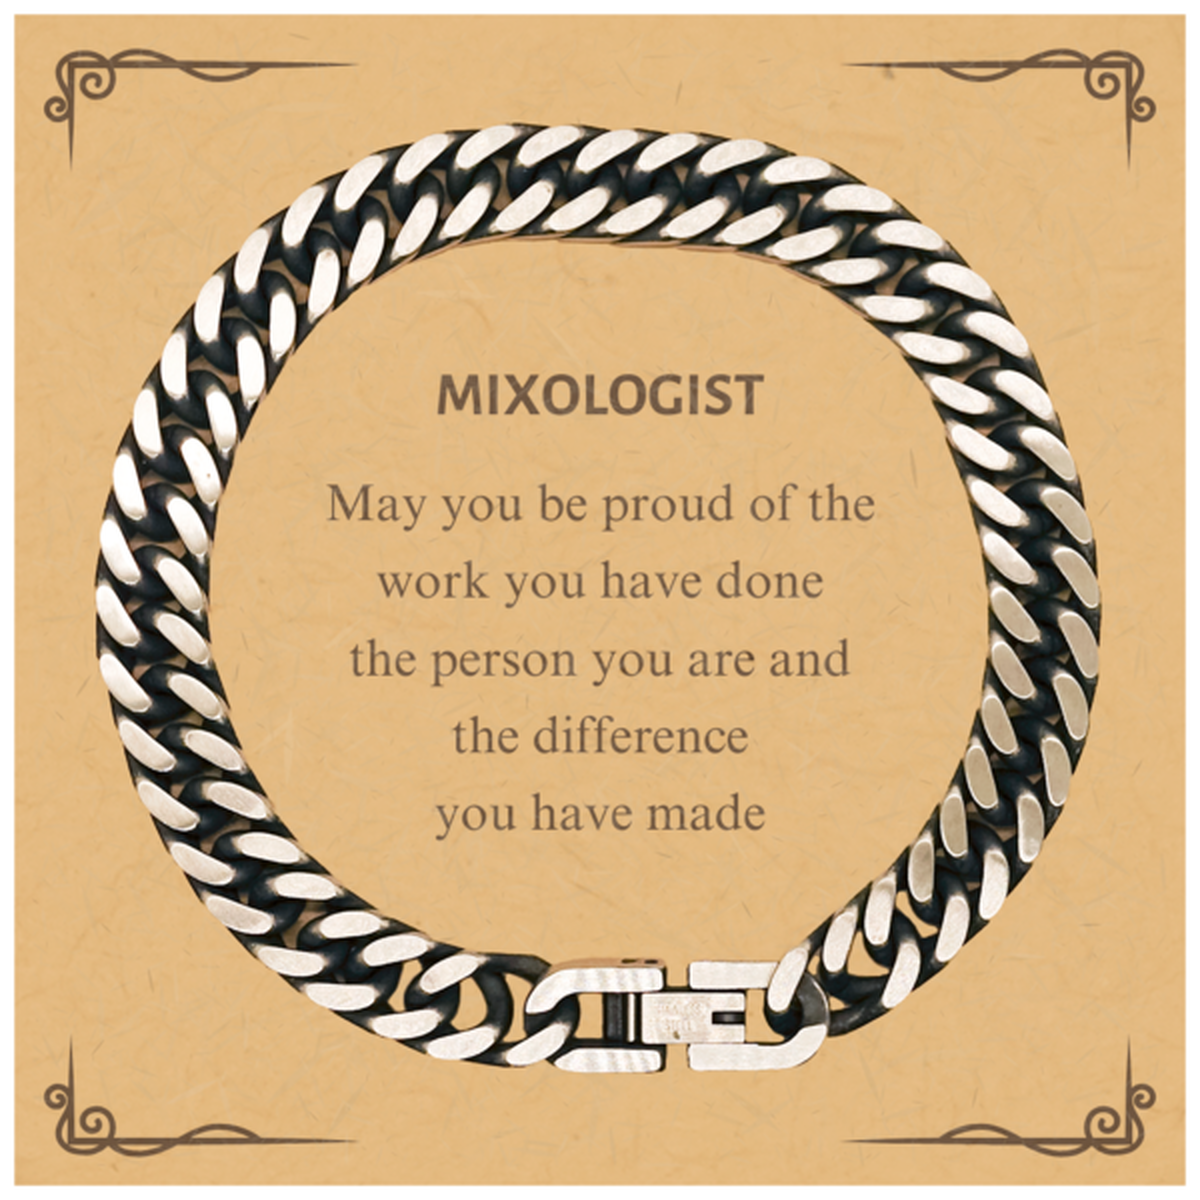 Mixologist May you be proud of the work you have done, Retirement Mixologist Cuban Link Chain Bracelet for Colleague Appreciation Gifts Amazing for Mixologist